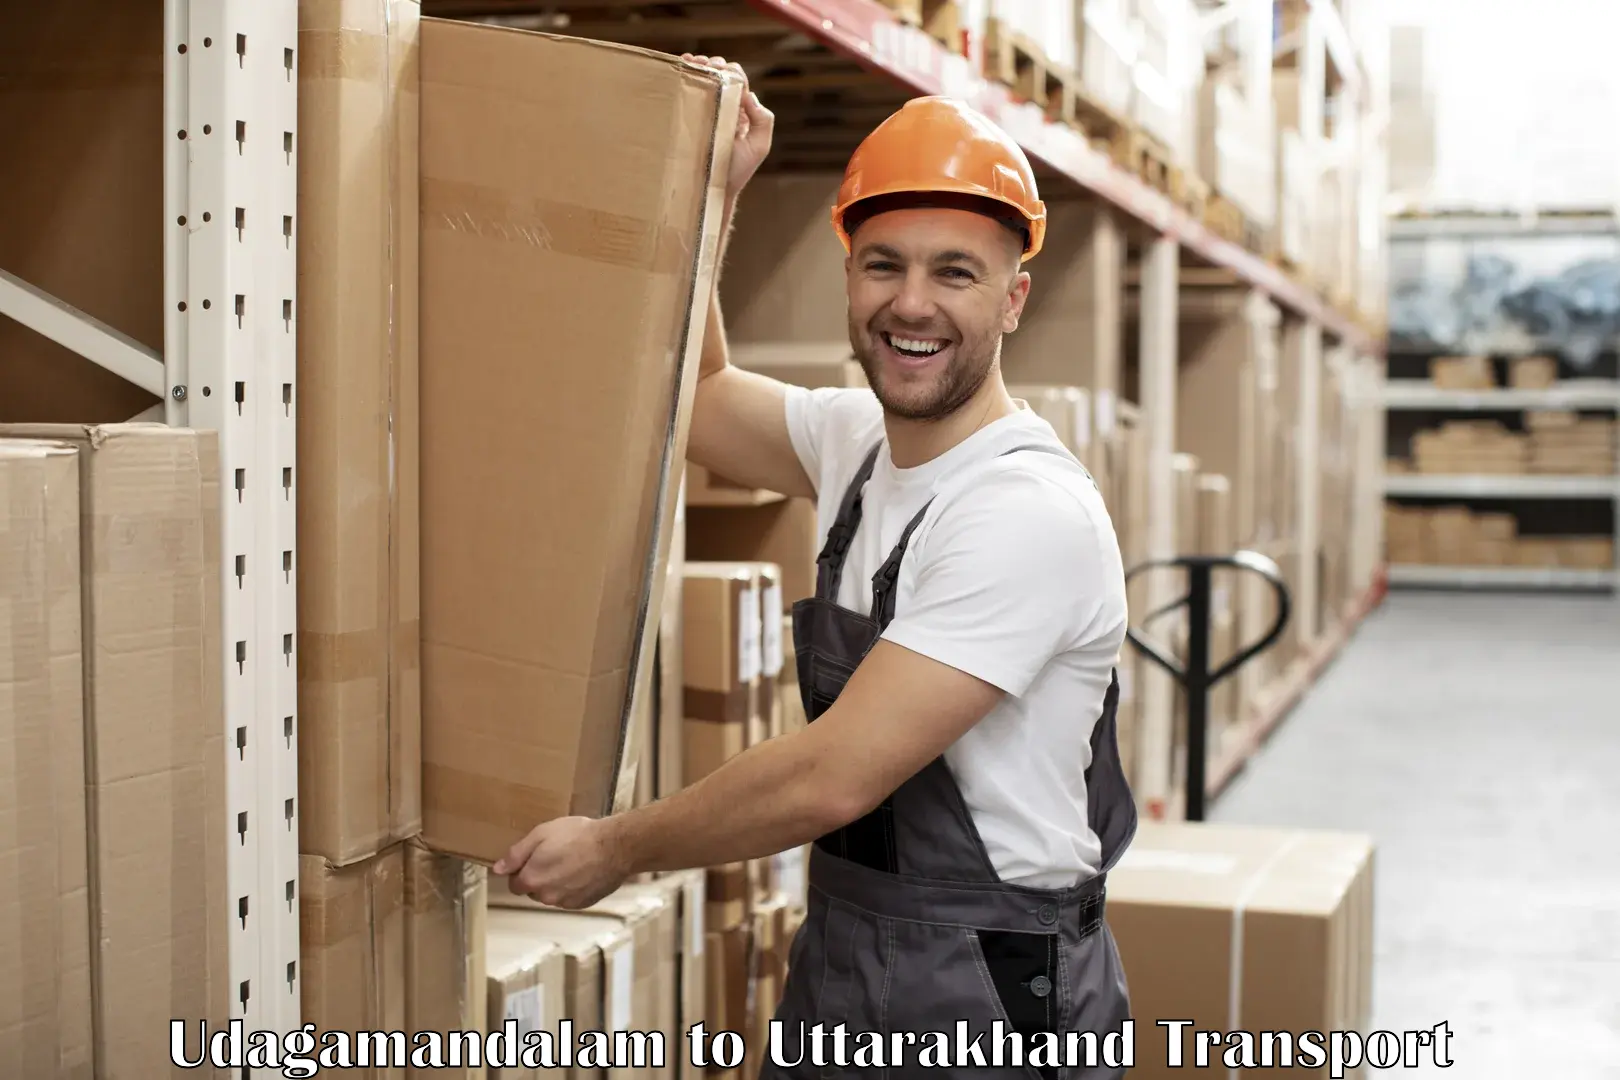 Shipping services Udagamandalam to Mussoorie